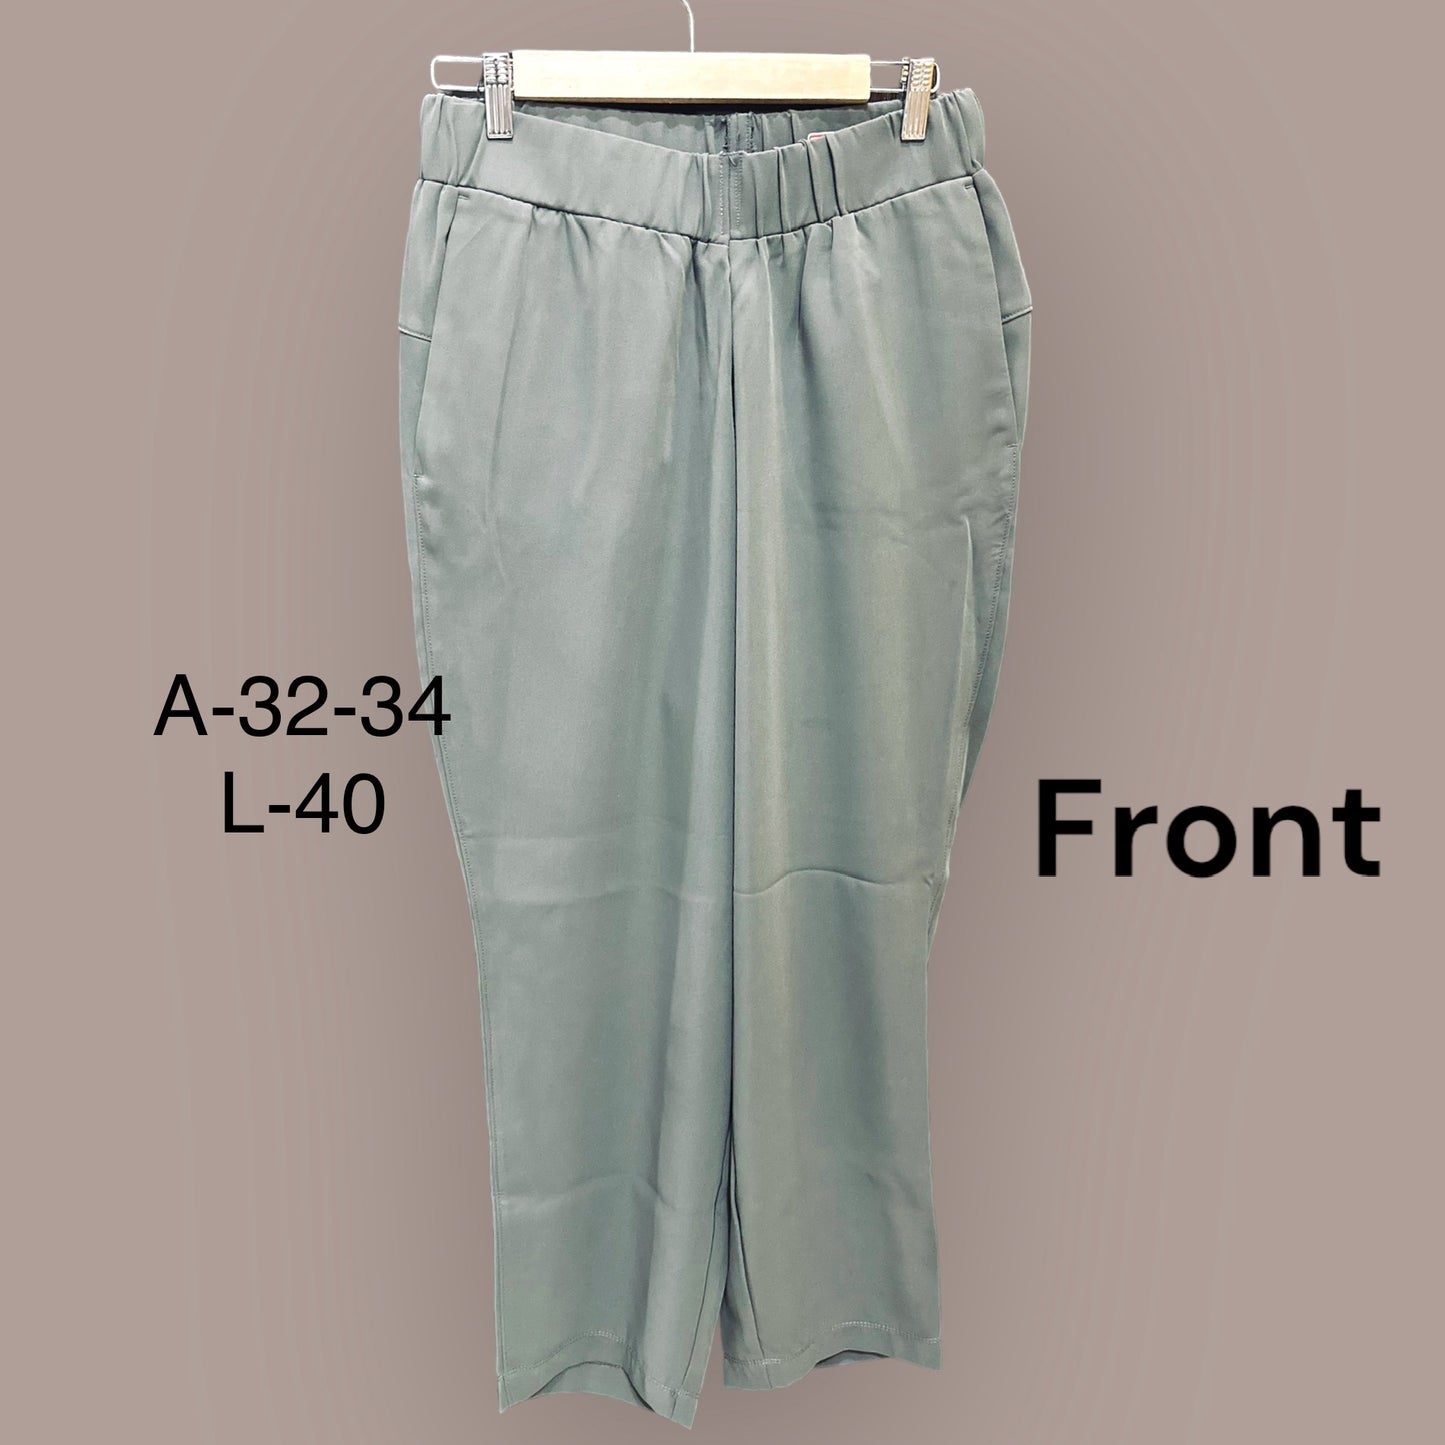 Olive Airport Pants